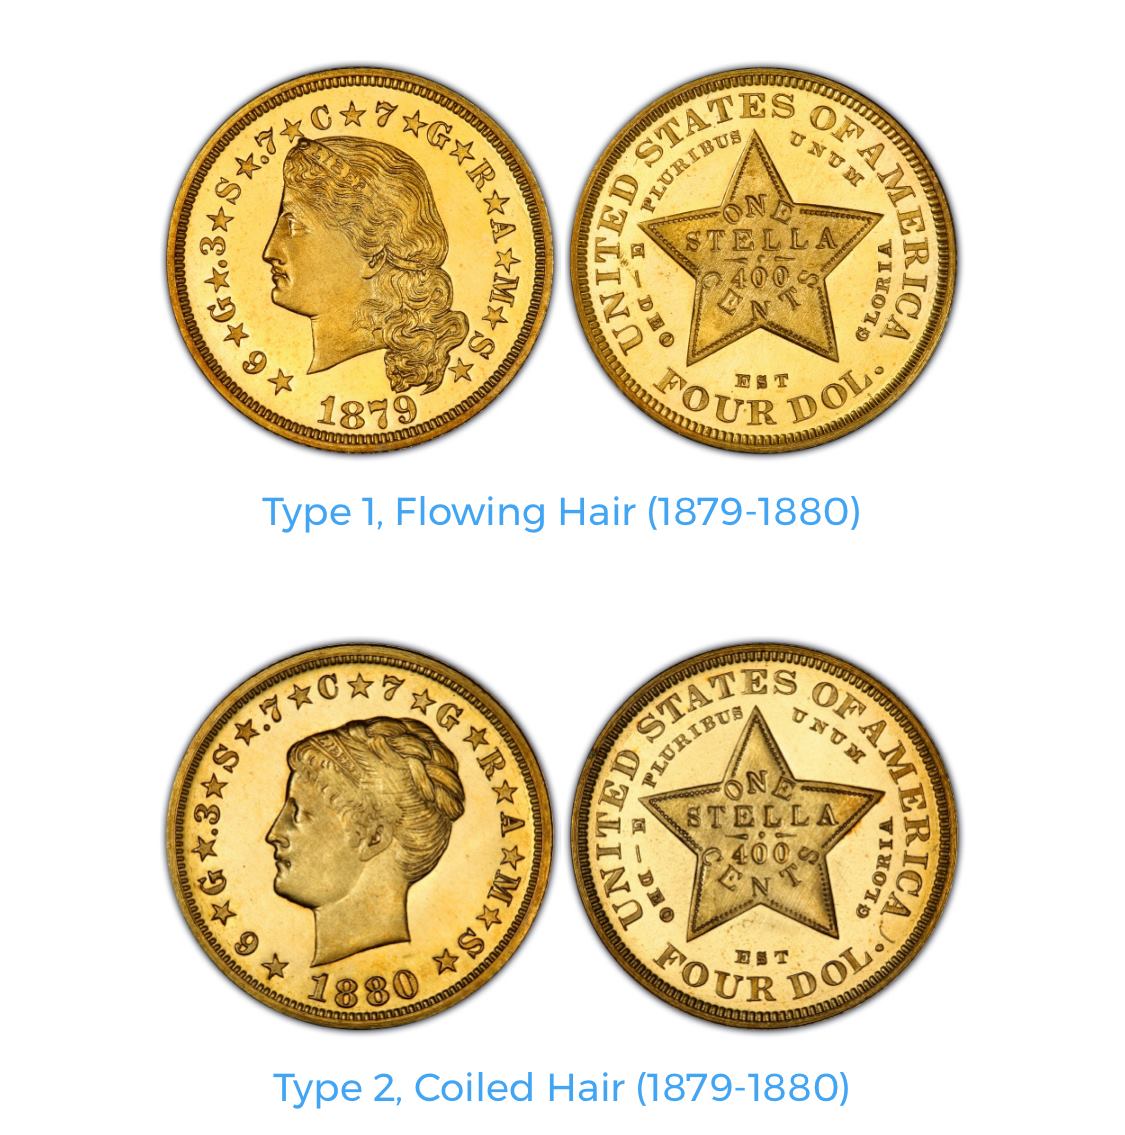 United States Gold Coins